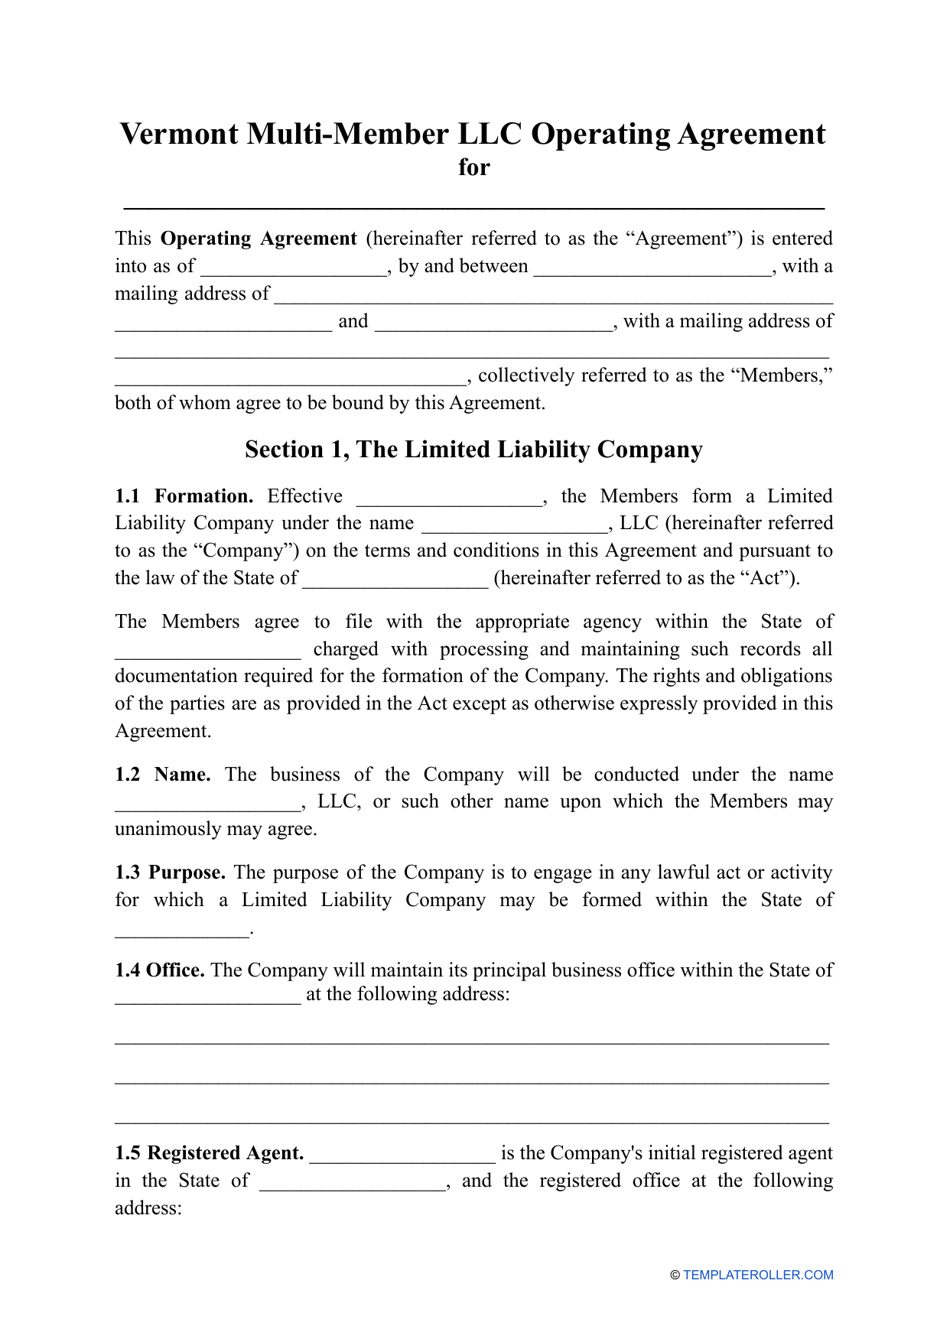 Multi-Member LLC Operating Agreement Template - Vermont, Page 1